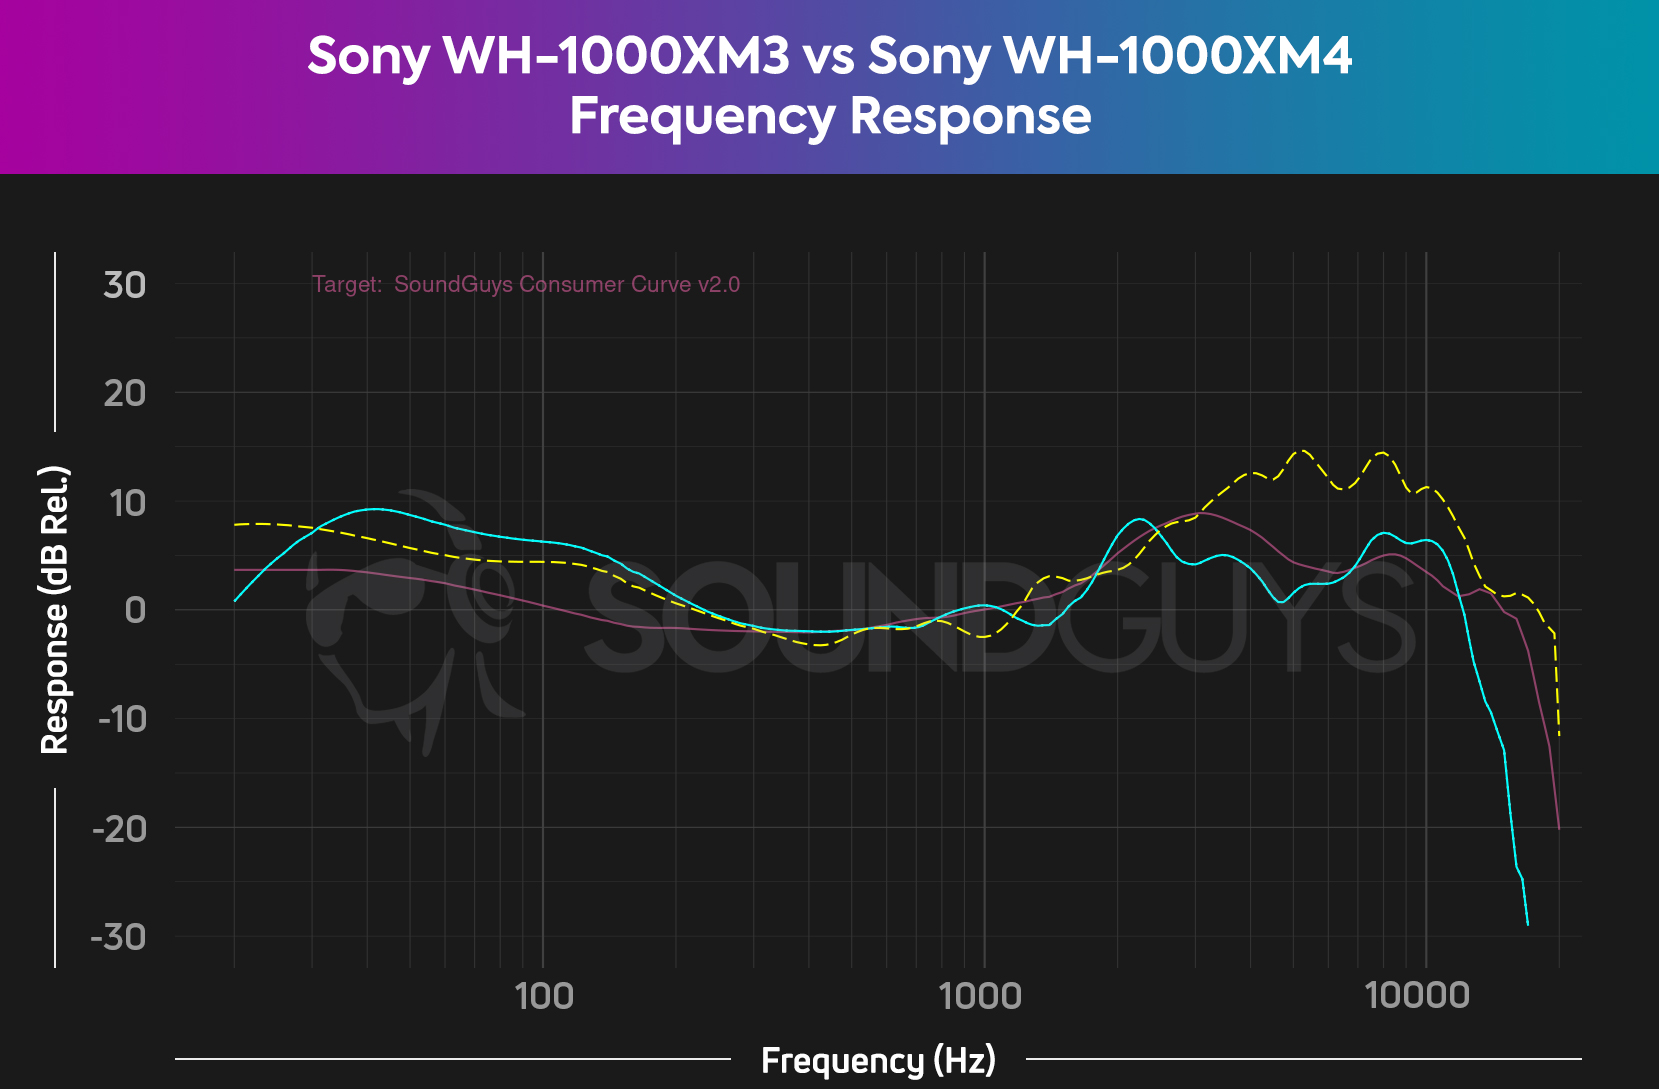 A chart compares the Sony WH-1000XM3 (cyan) frequency response against the Sony WH-1000XM4 (yellow dash) and overlays the two atop the SoundGuys Consumer Curve V2 (pink), revealing the XM3 t have a louder bass output than the XM4 and SoundGuys curve.